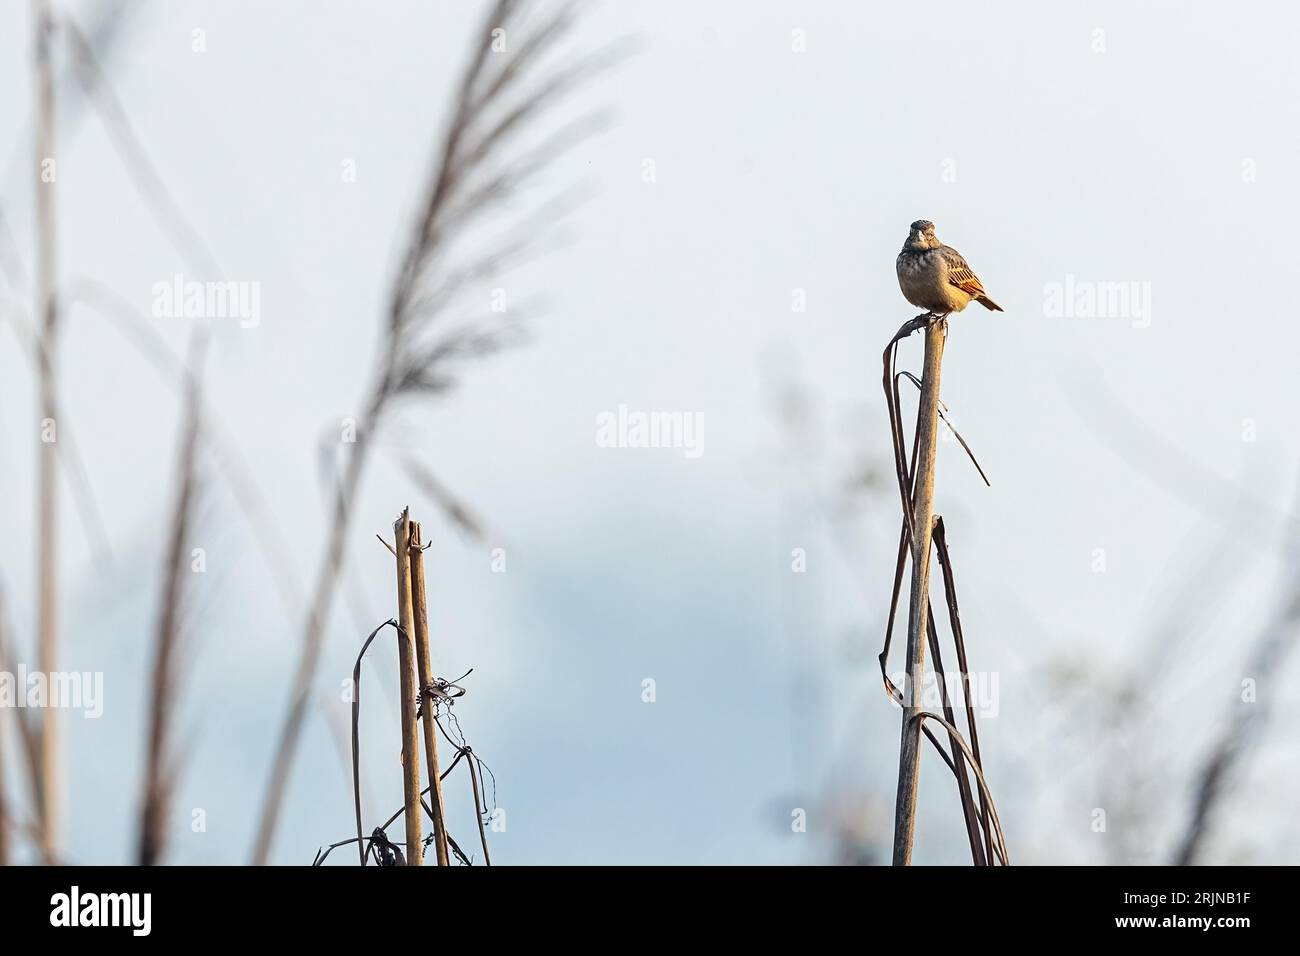 The Horsfield's bush lark perched on a dry reed. Stock Photo